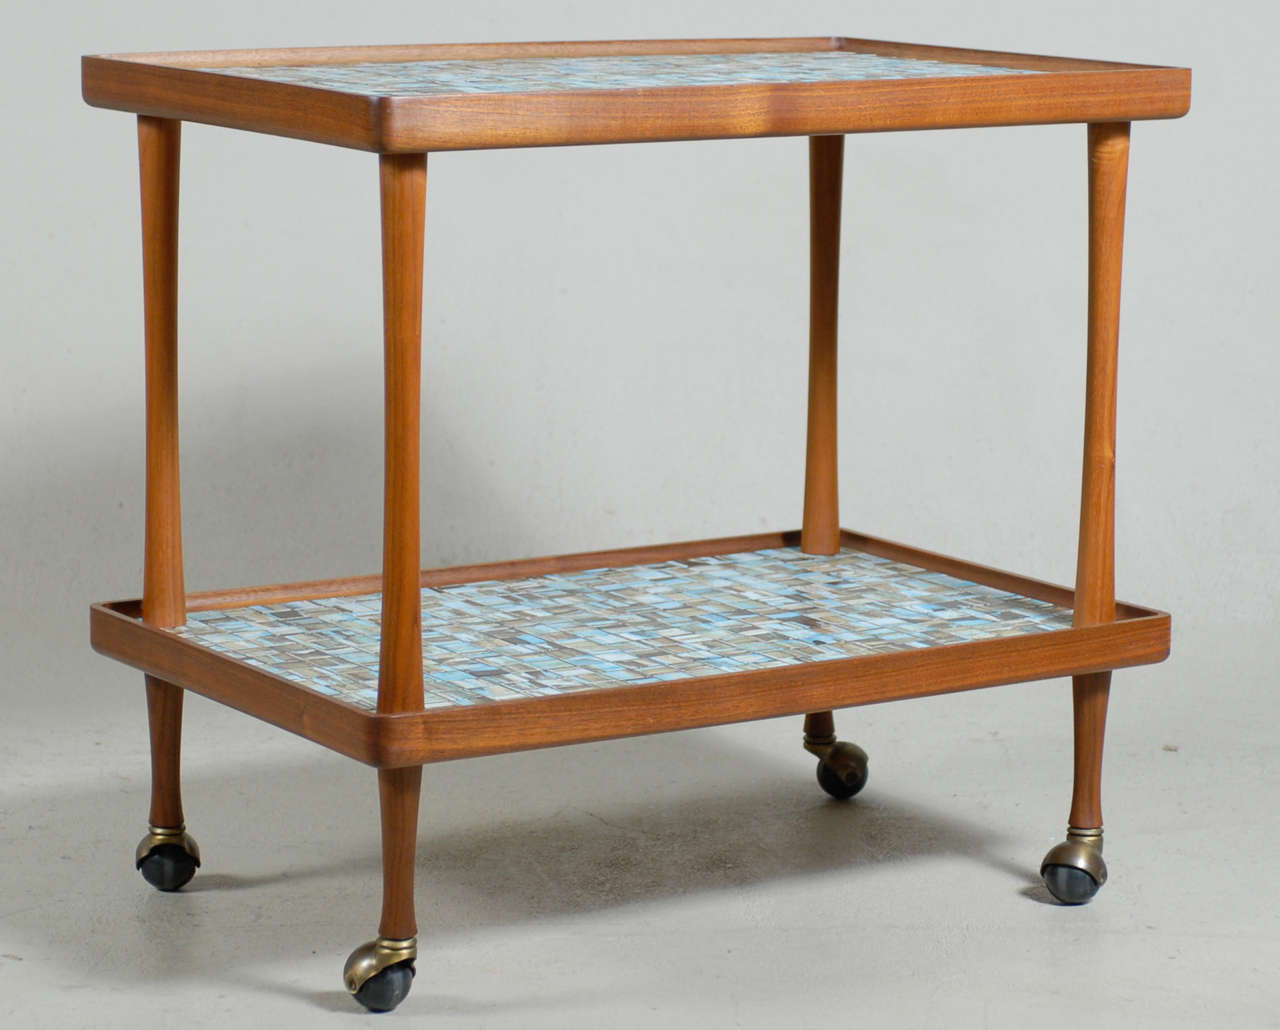 Rare, 1960s Gordon Martz tile and oiled walnut bar/tea cart by Marshall Studios.

This piece is located off-site, to view in person please contact City Issue to make an appointment at the showroom.